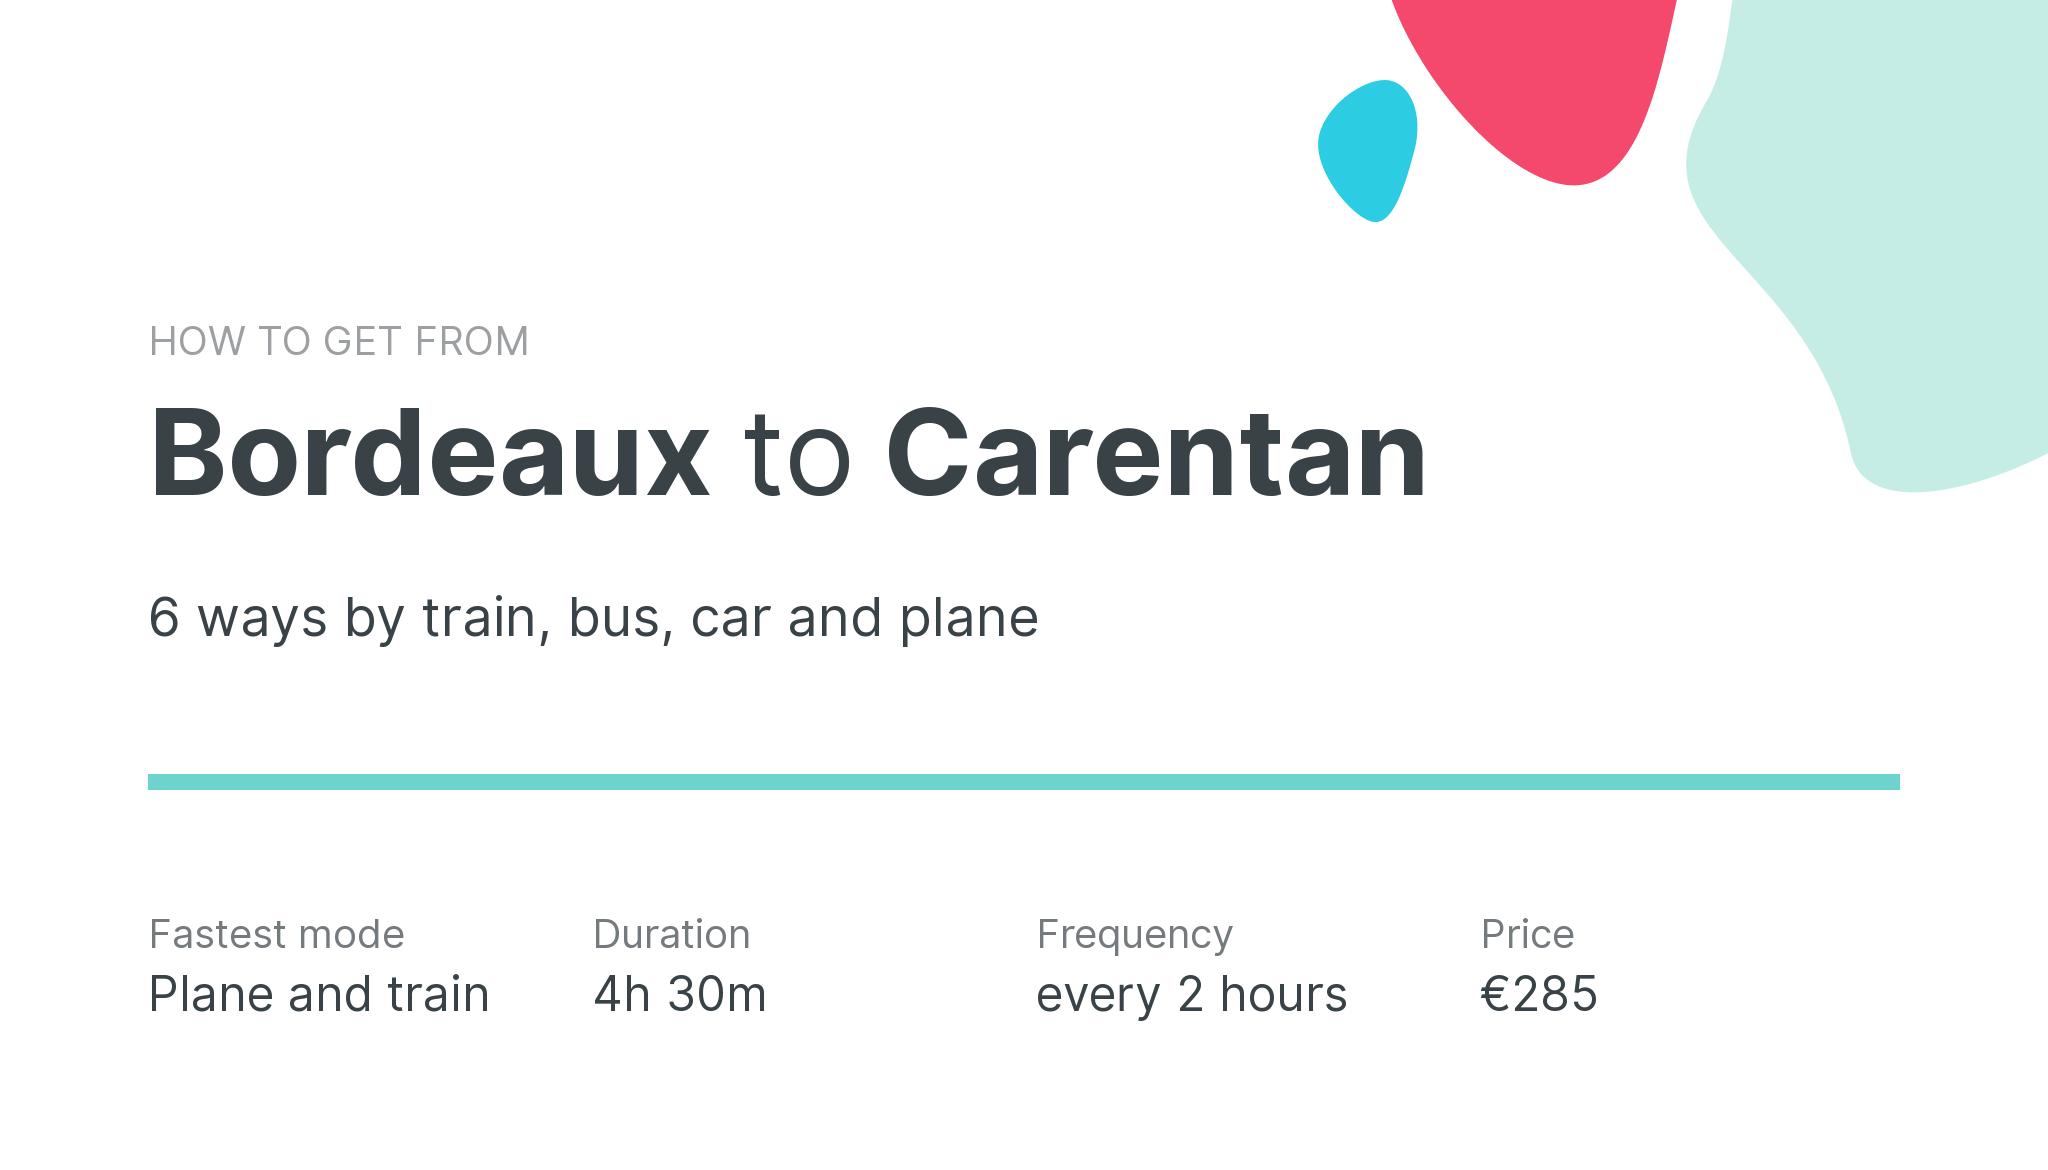 How do I get from Bordeaux to Carentan